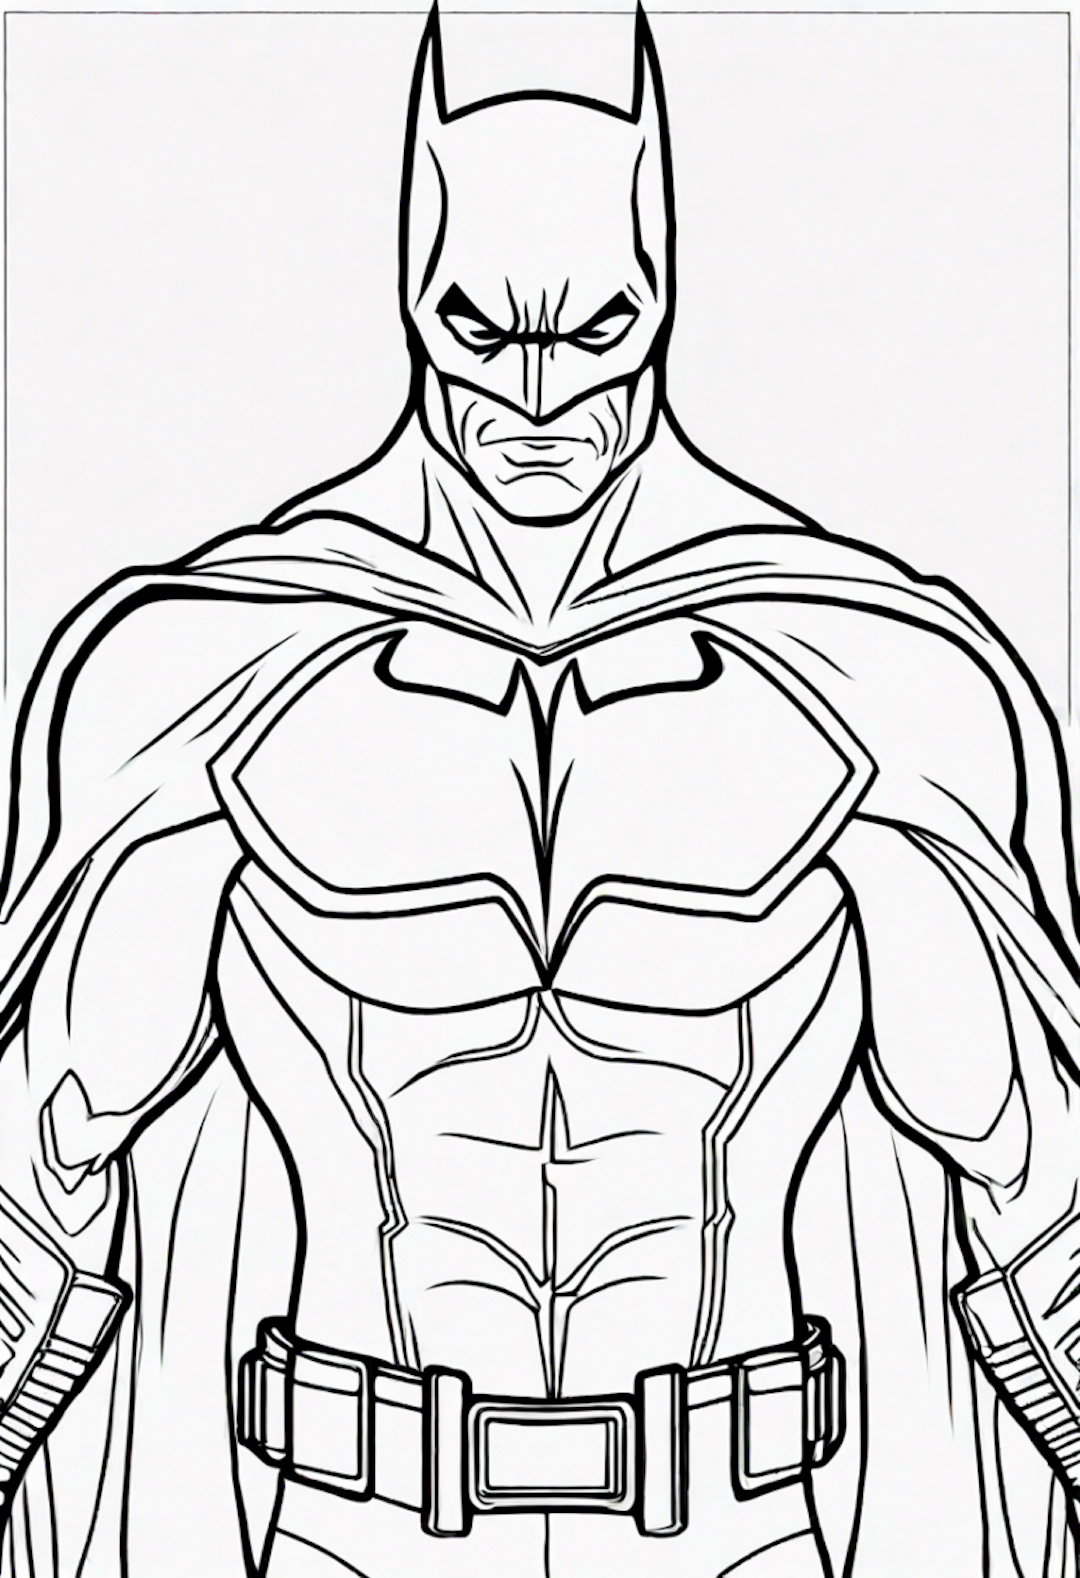 Batman in Action: Coloring Page coloring pages